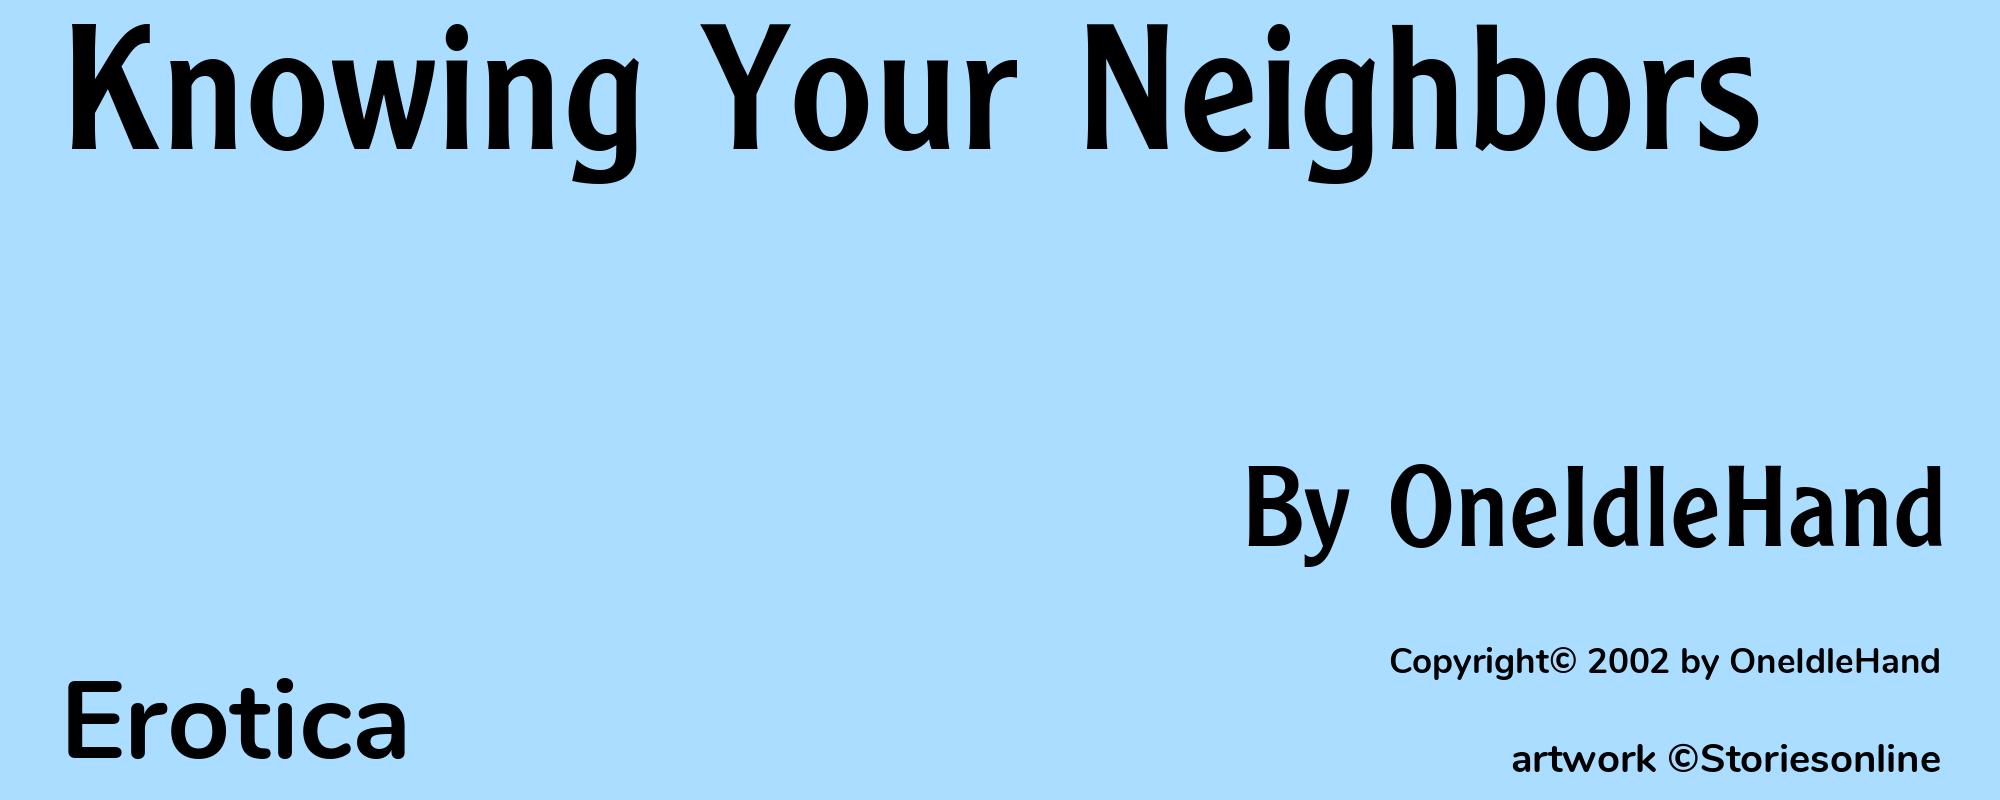 Knowing Your Neighbors - Cover